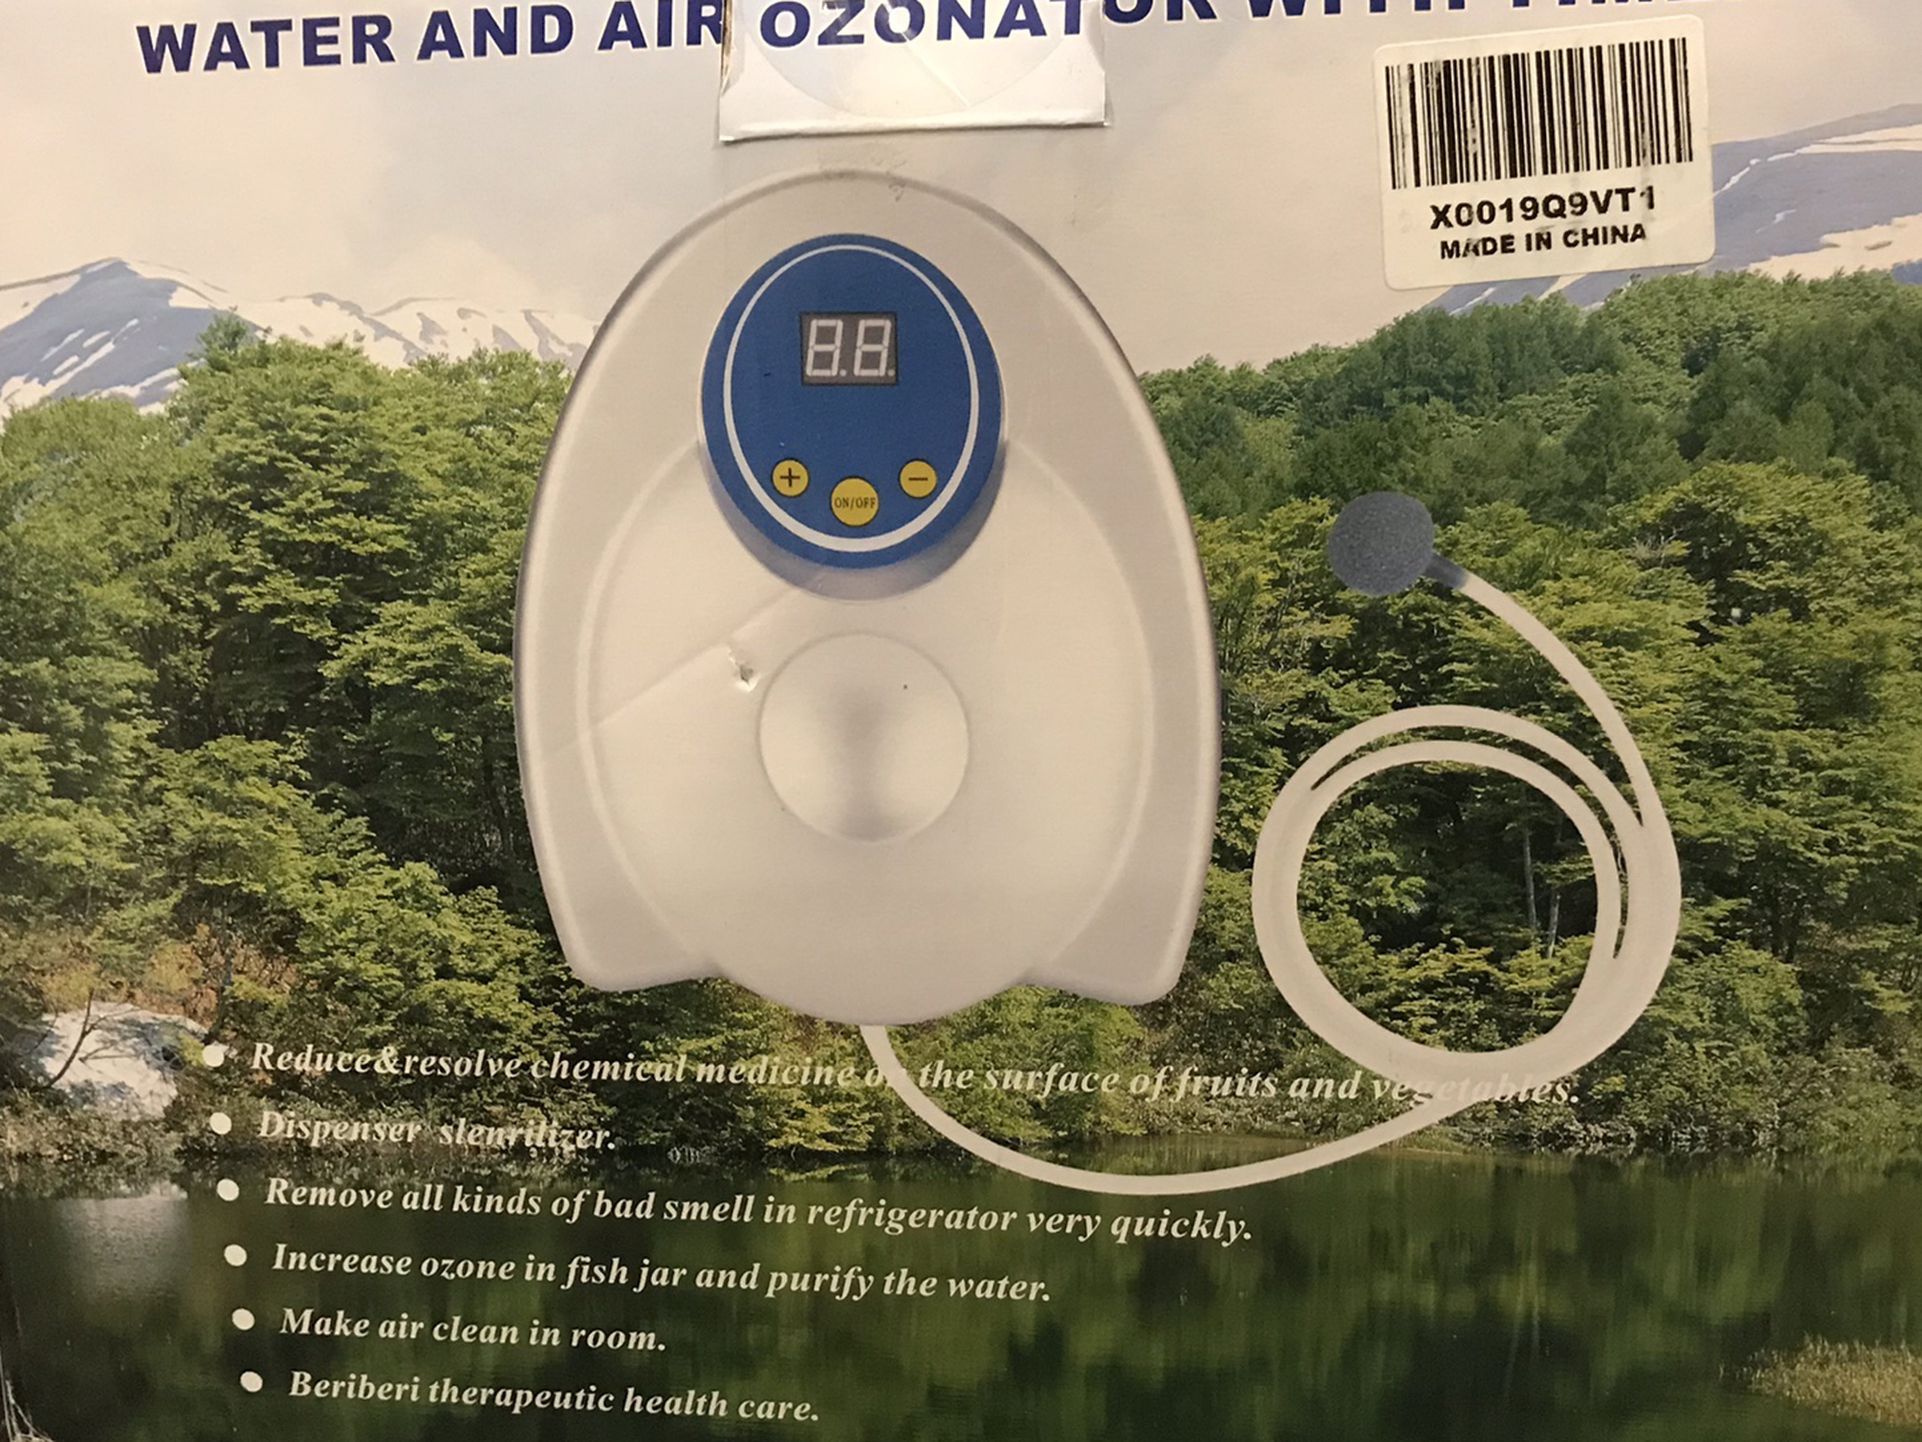 Water & Air Ozonator w/Timer